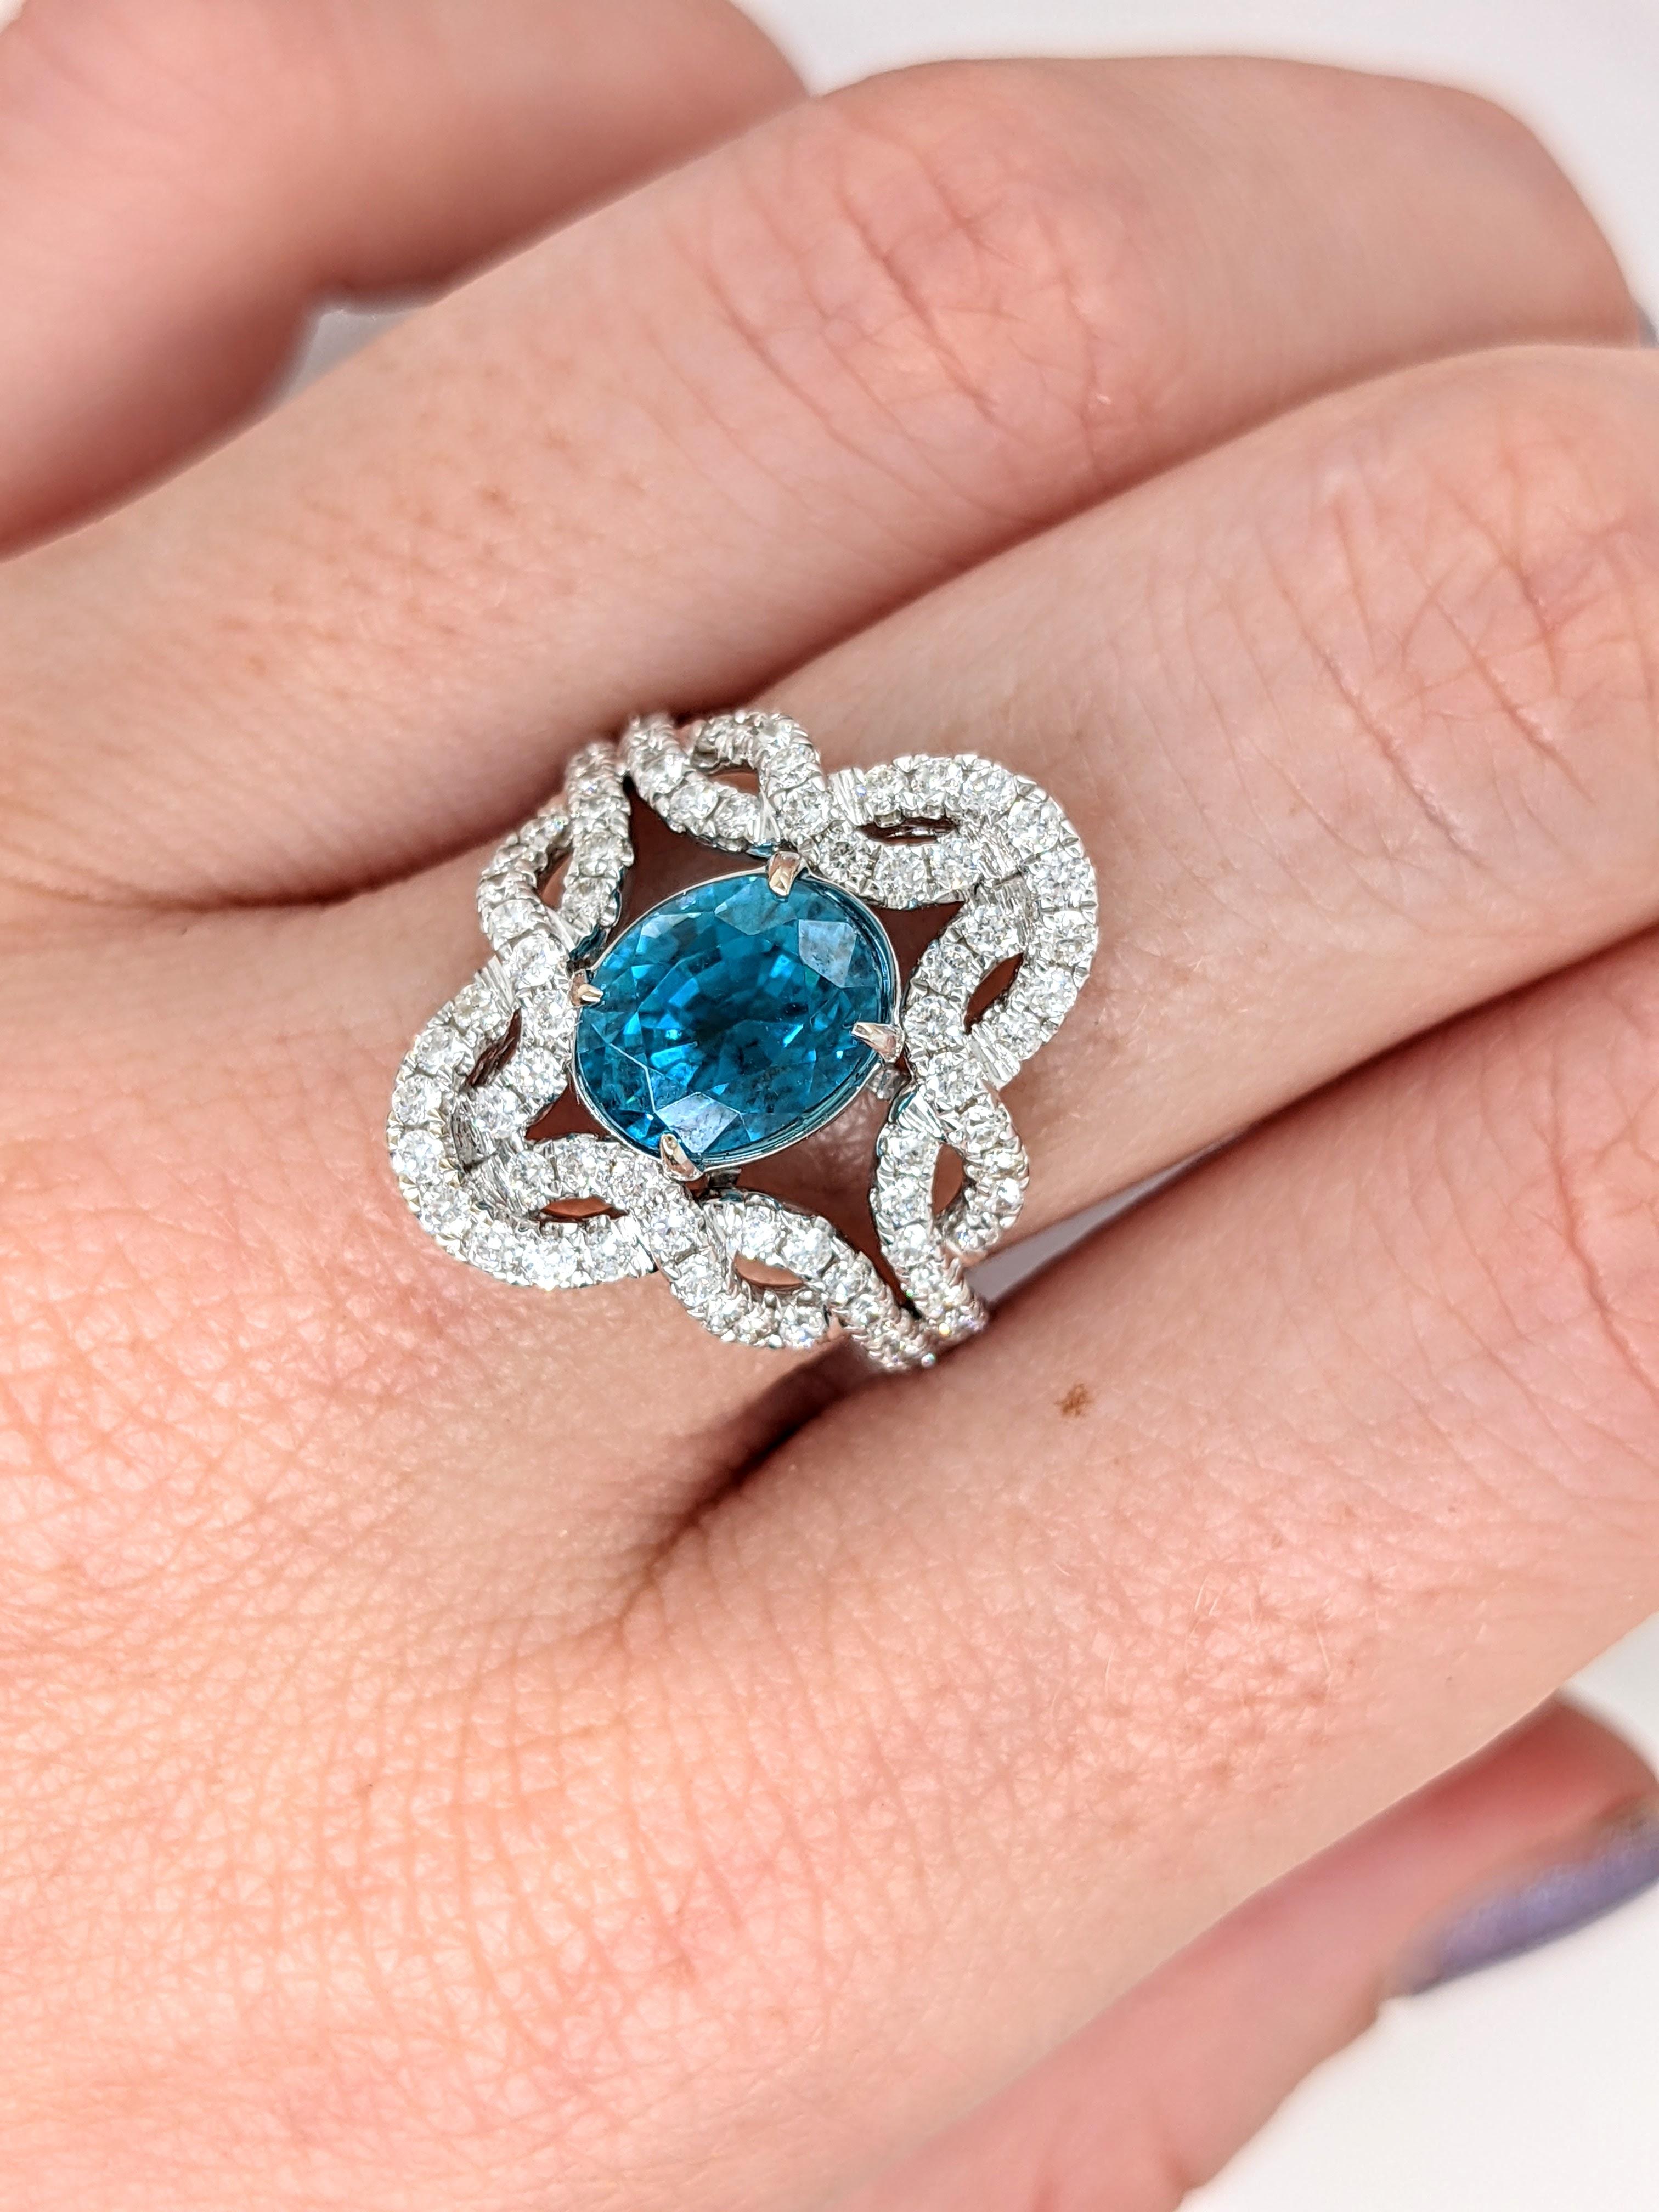 4.6ct Blue Zircon Ring in 14K Gold w Natural Diamond Accents  Intricate Pavé For Sale 1